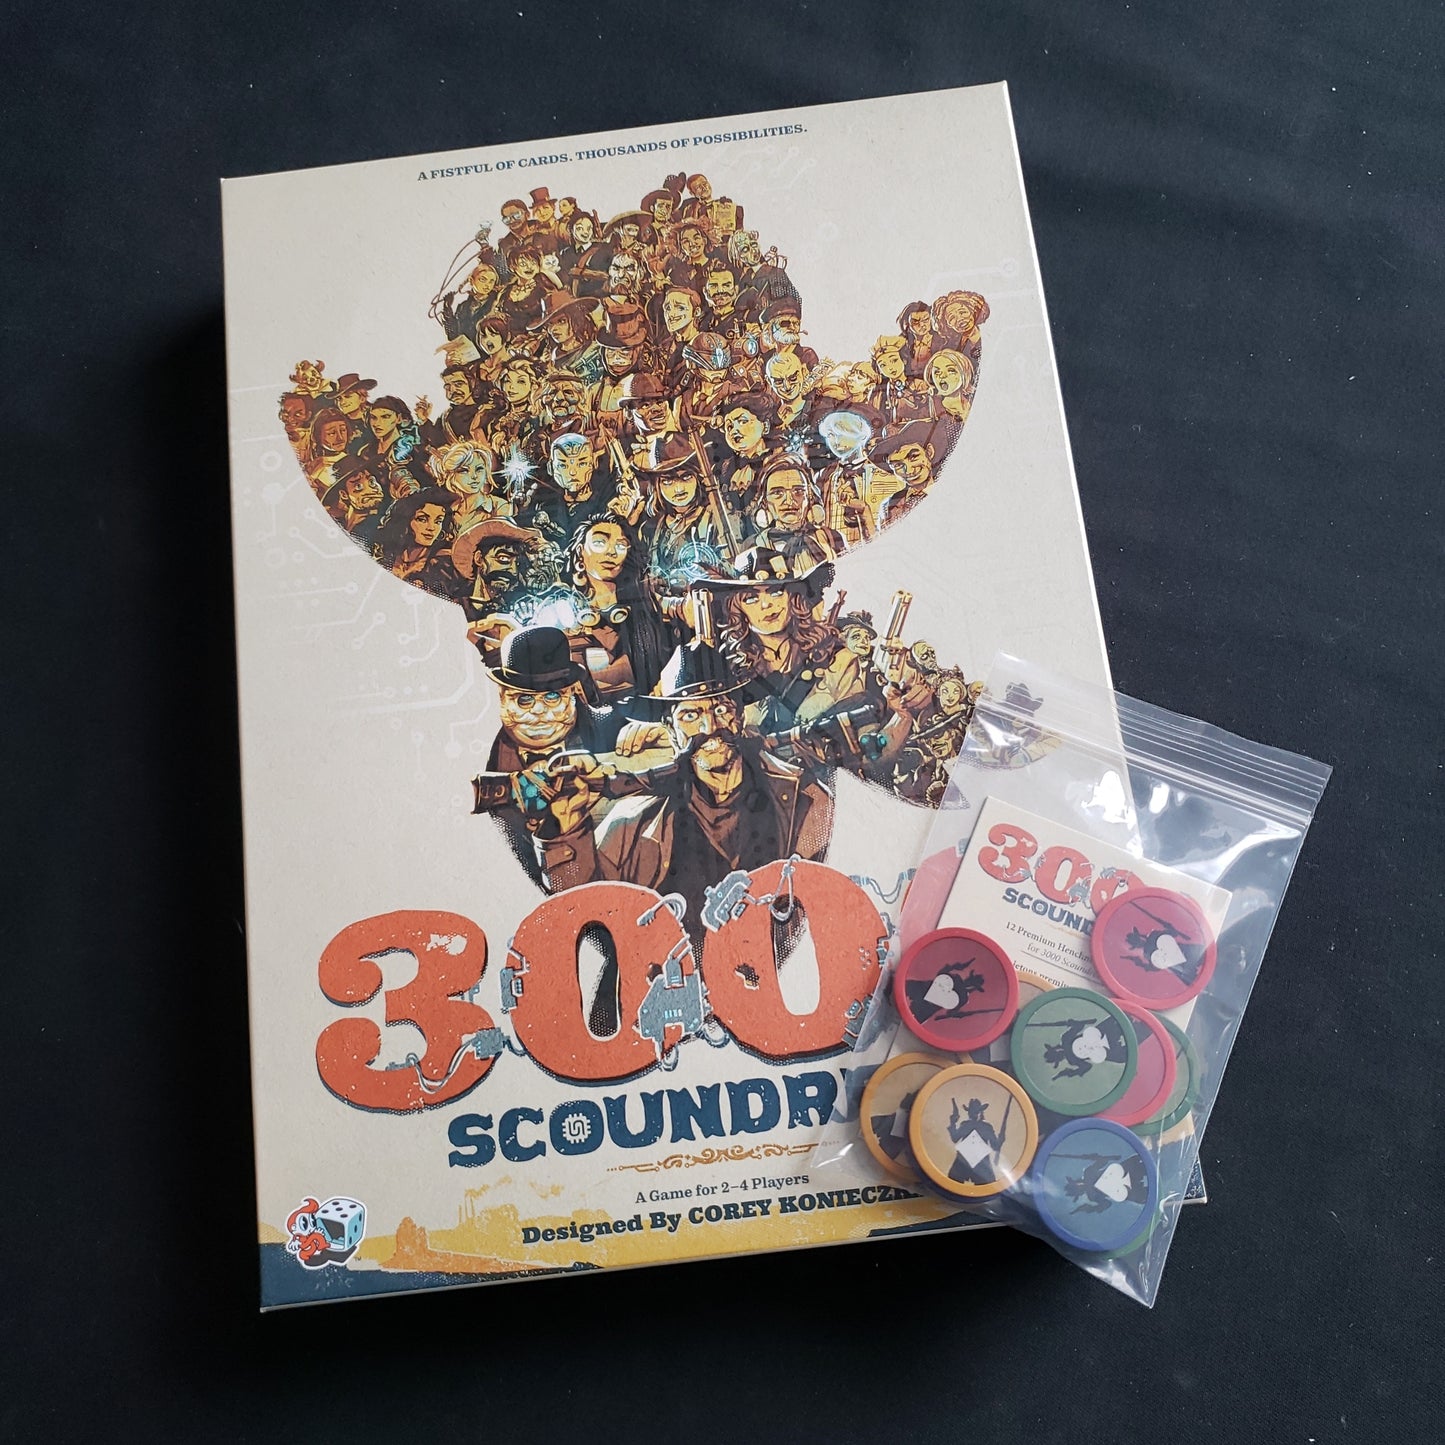 Image shows the front cover of the box of the 3000 Scoundrels board game with a package of promo poker chips on top